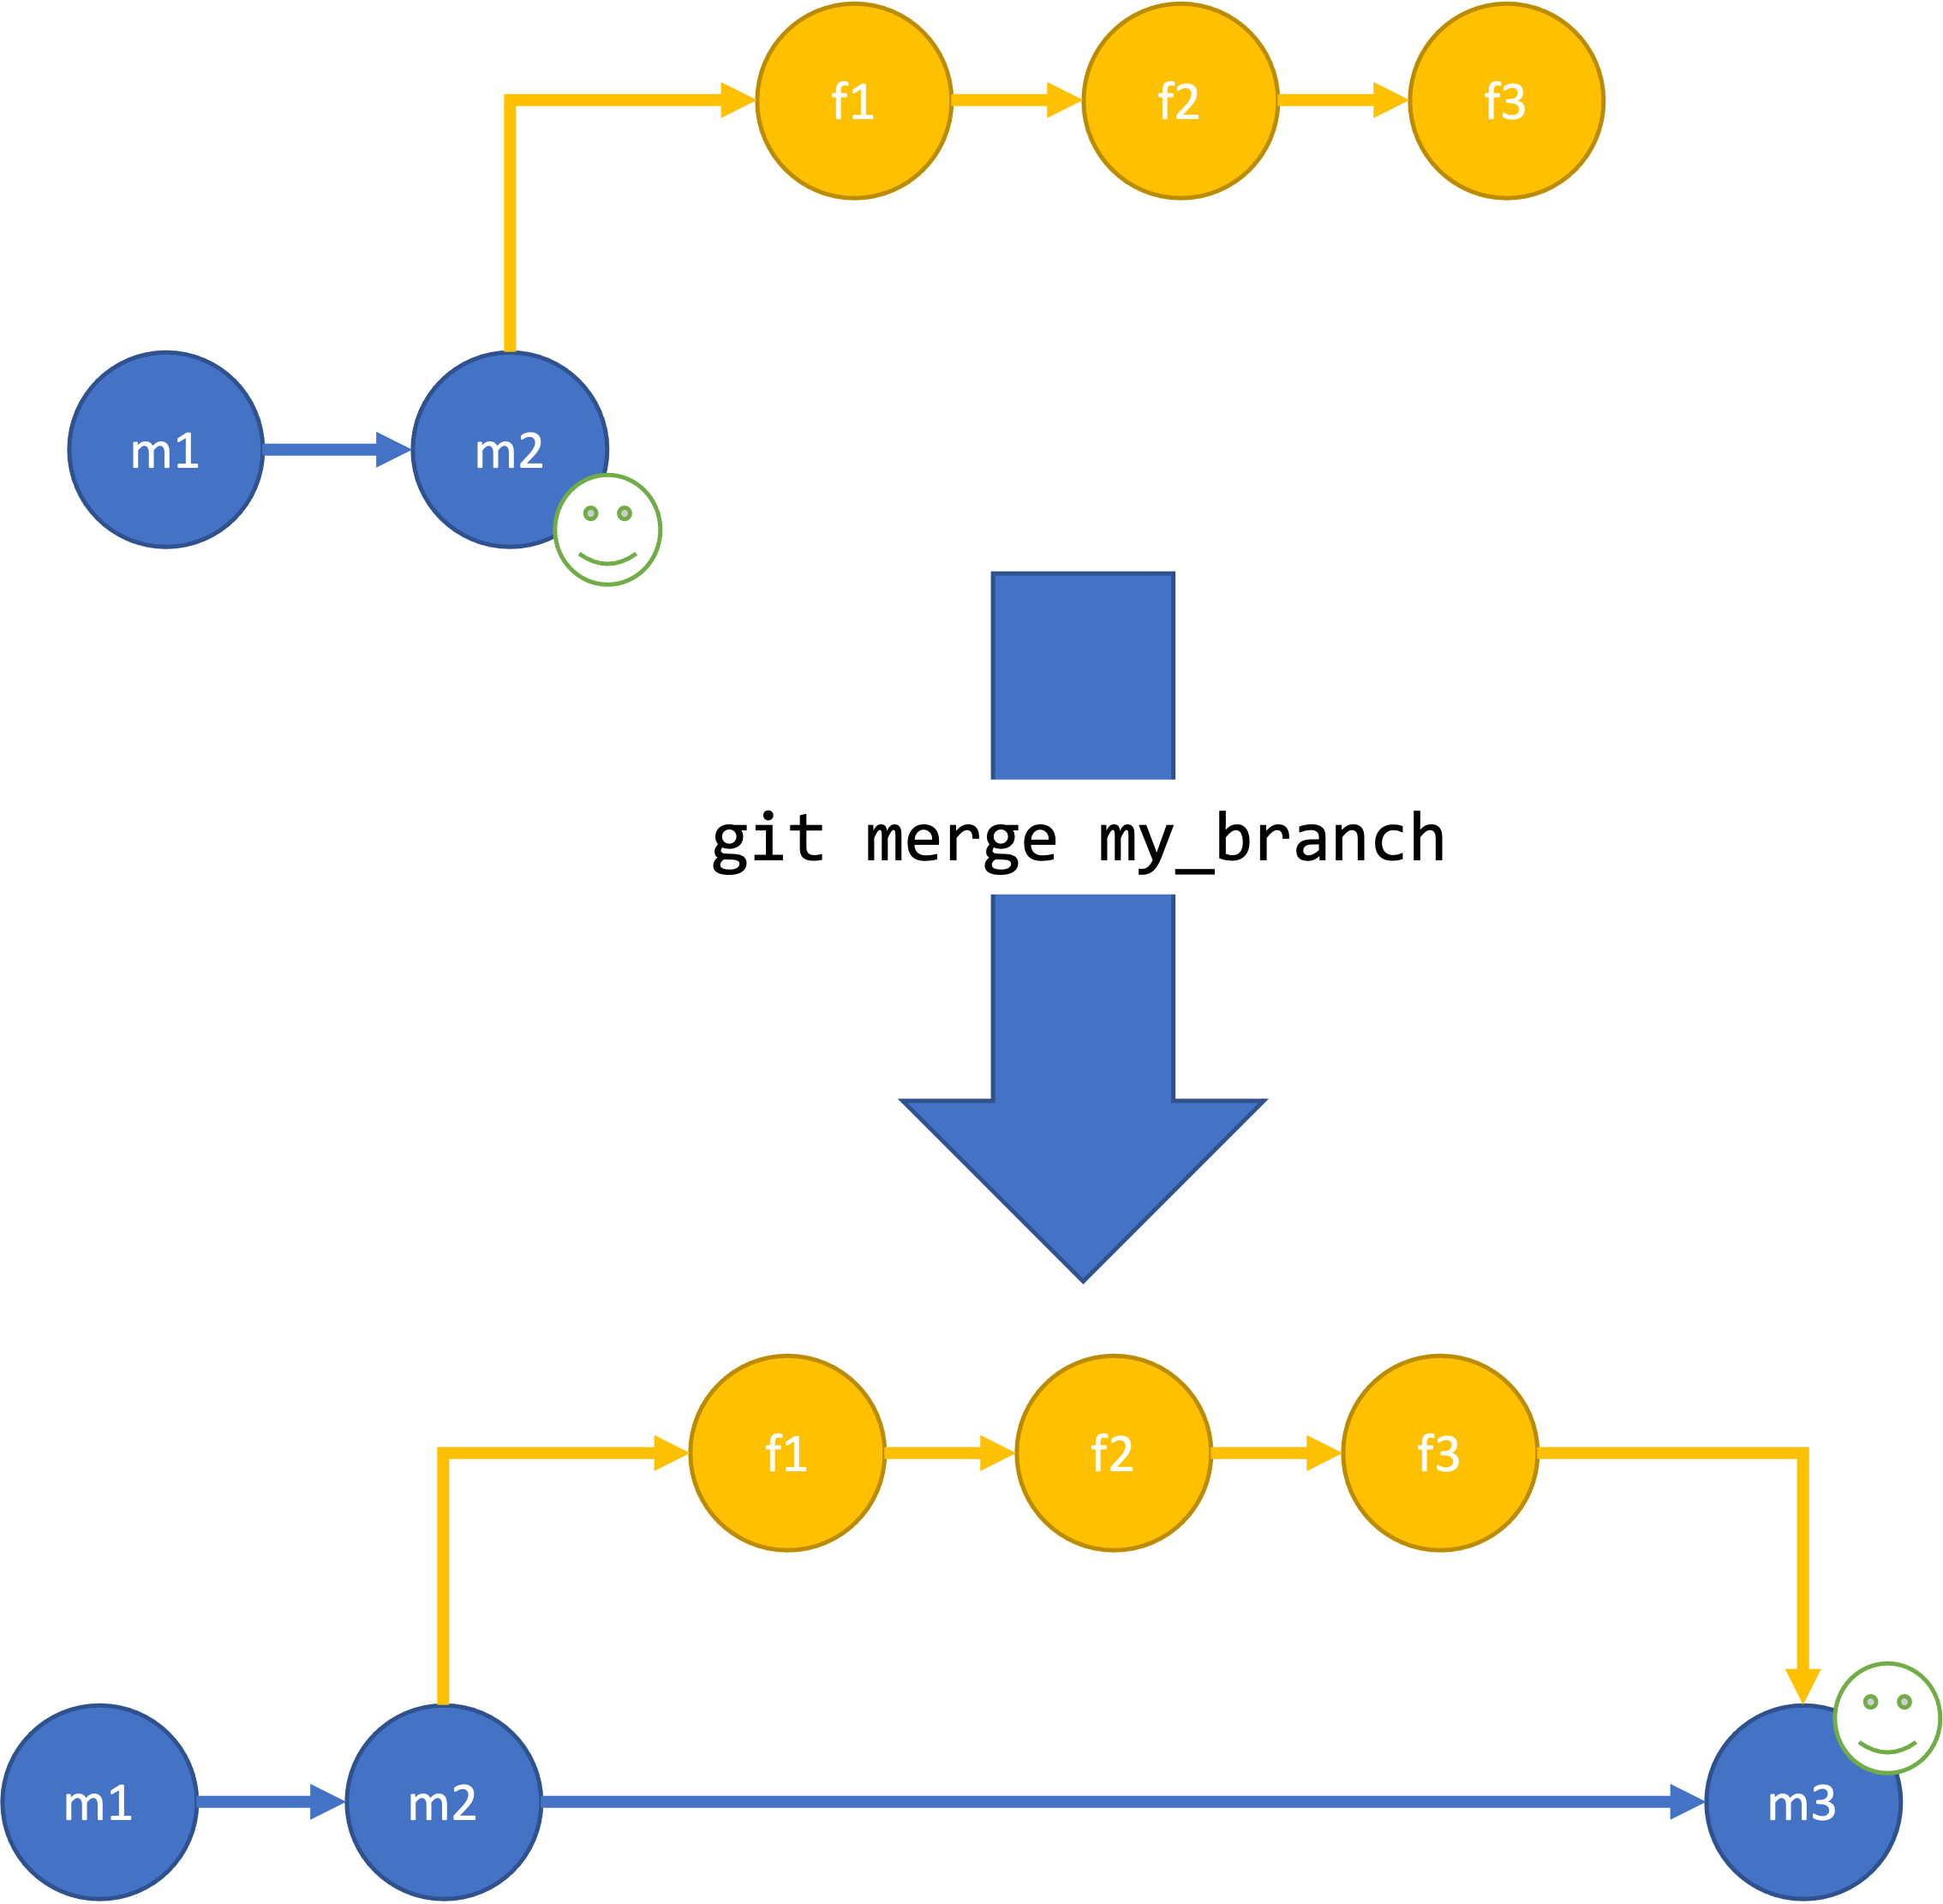 Figure showing the process of merging the feature branch into the main branch. First a graph diagram of a repository is shown with a main and feature branch. The feature branch with three commits splits off the main branch after two commits. A smiley face is on the second commit of the main branch to show the current location. Below is an arrow with the text "git merge my_branch" followed by the same repository a new commit on the main branch with two arrows from the main and feature branches, showing the changes from the feature branch have been merged into main branch.